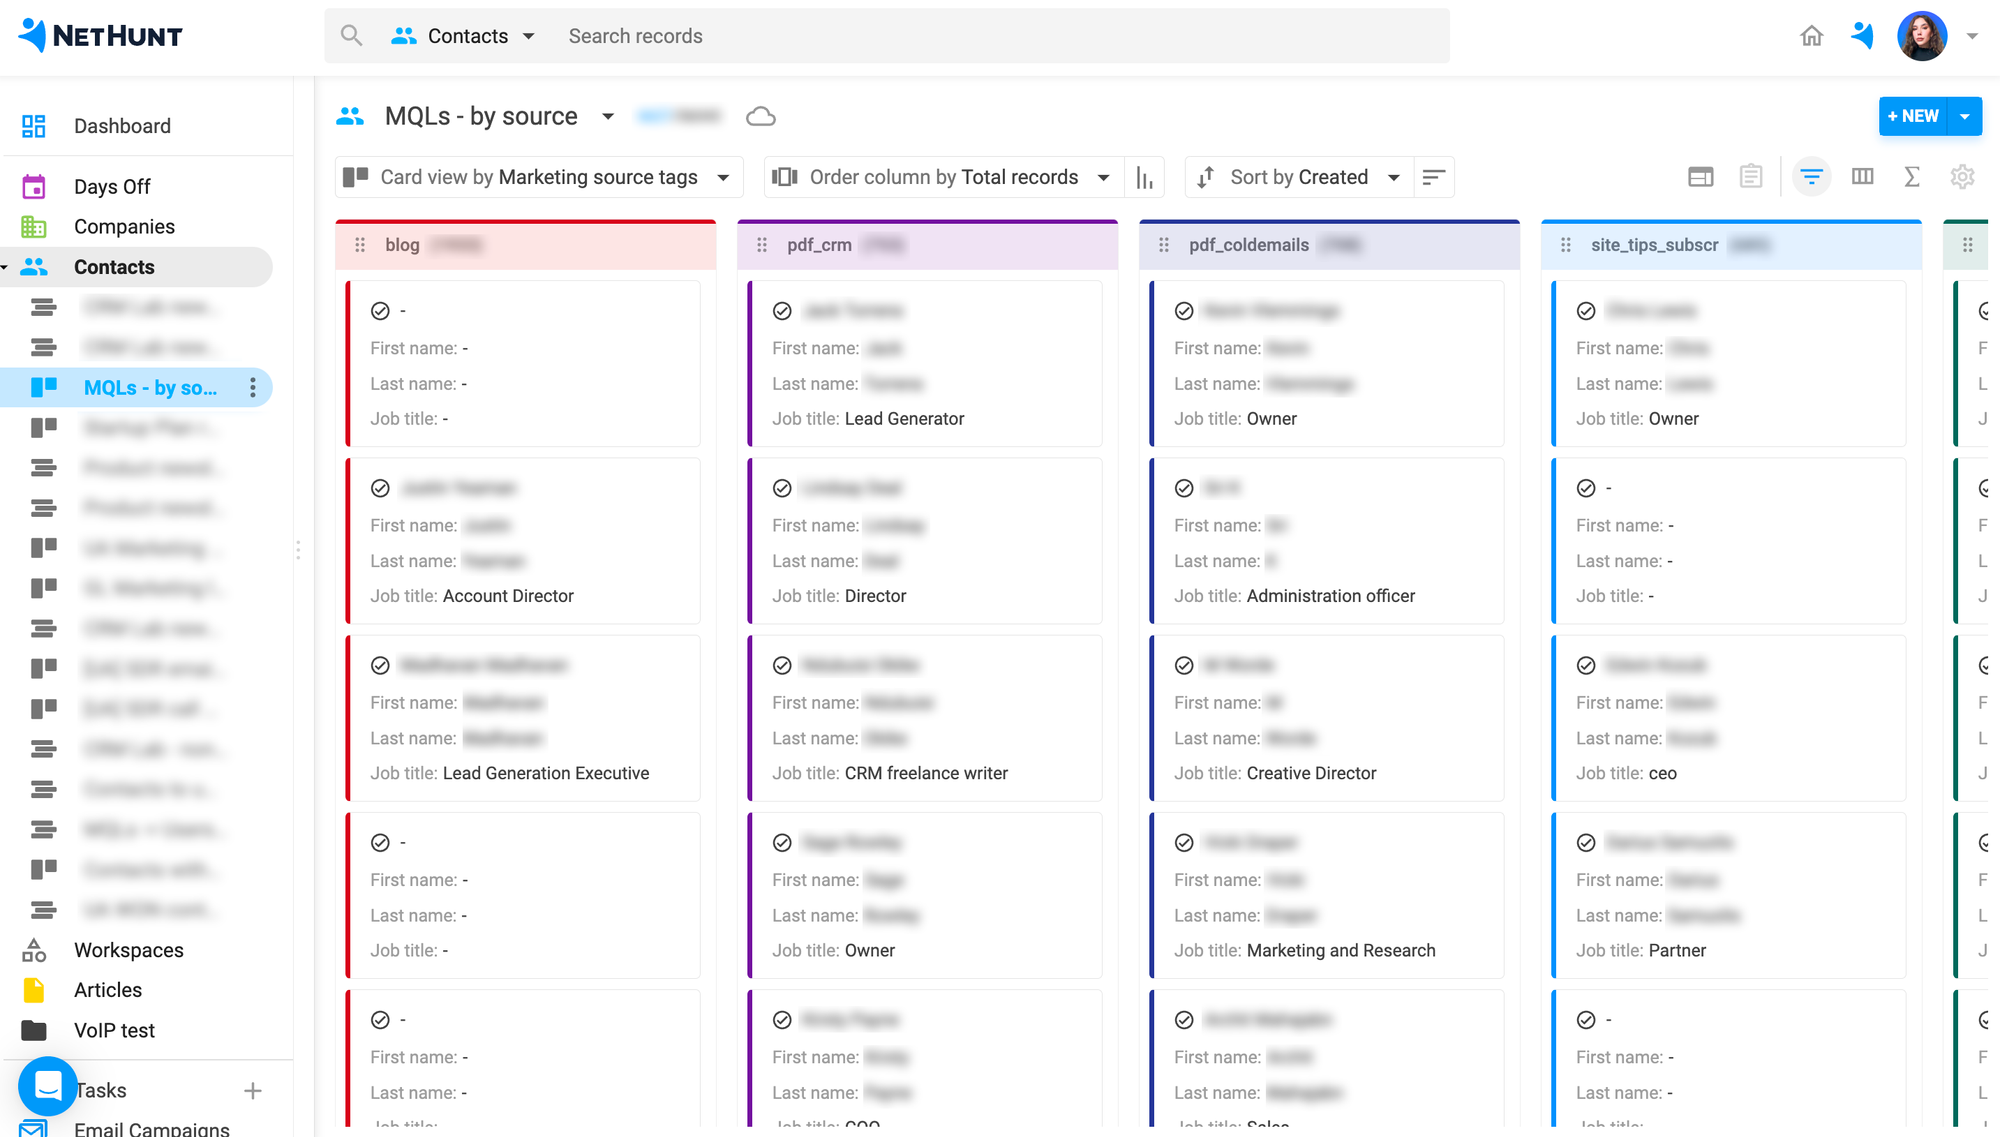 An example of a custom view in NetHunt CRM